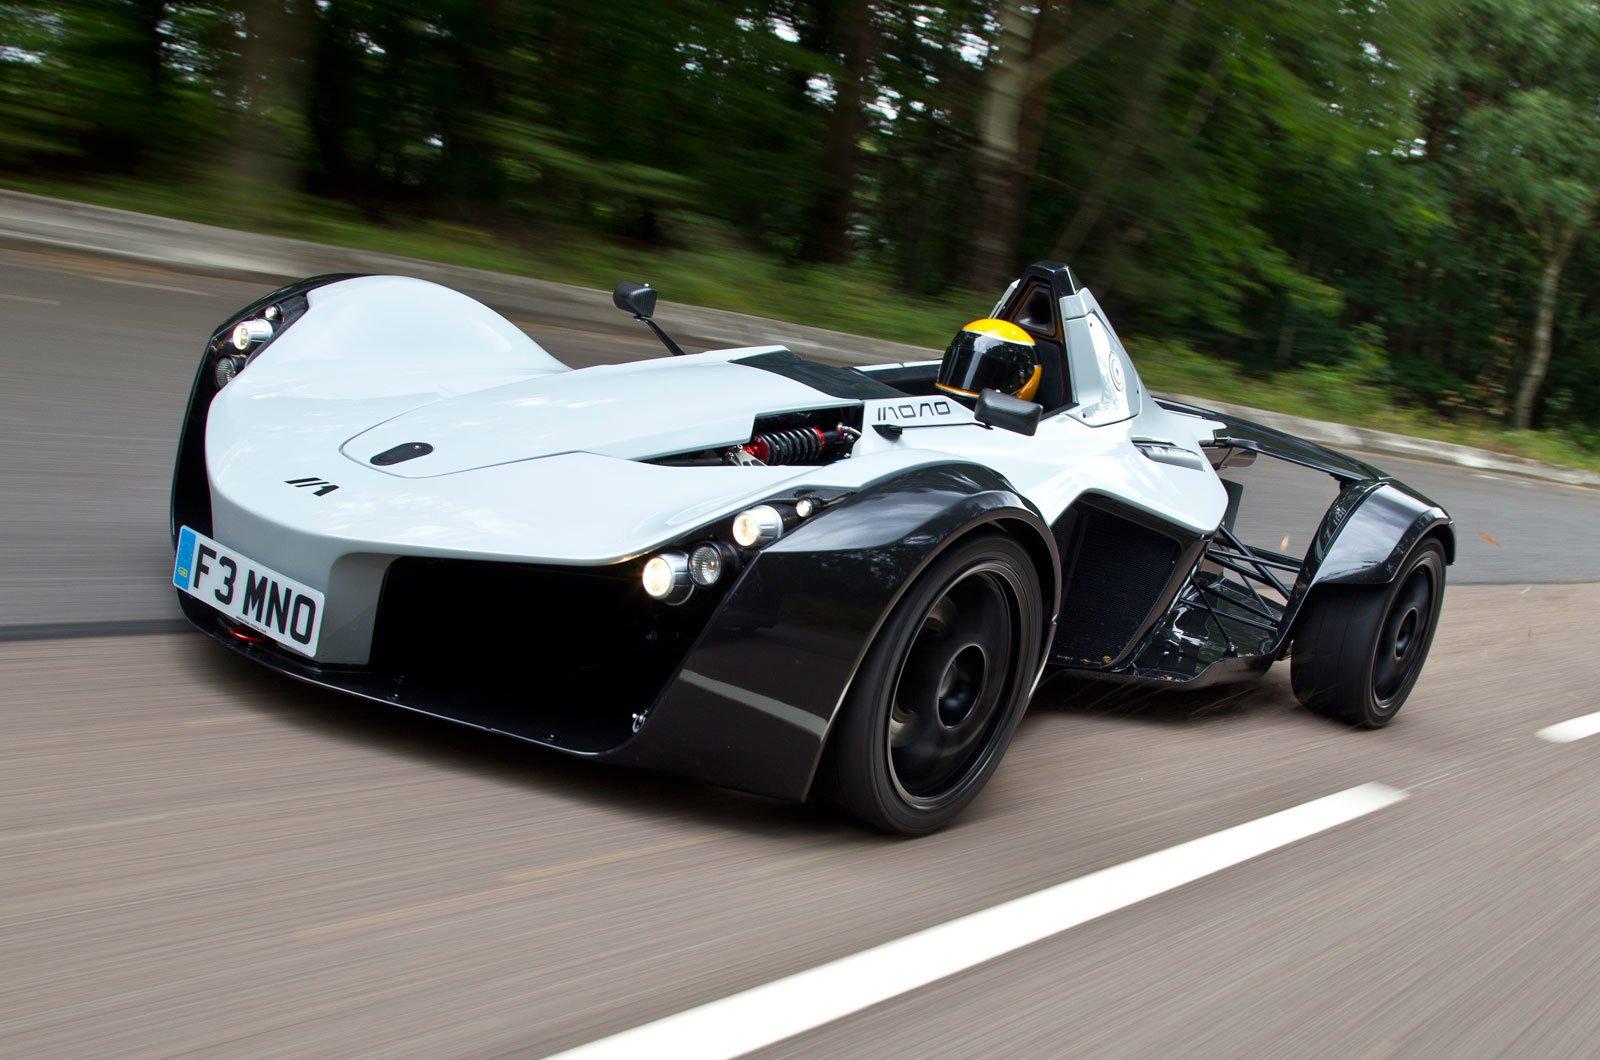 BAC Mono Wallpaper and Background Imagex1060